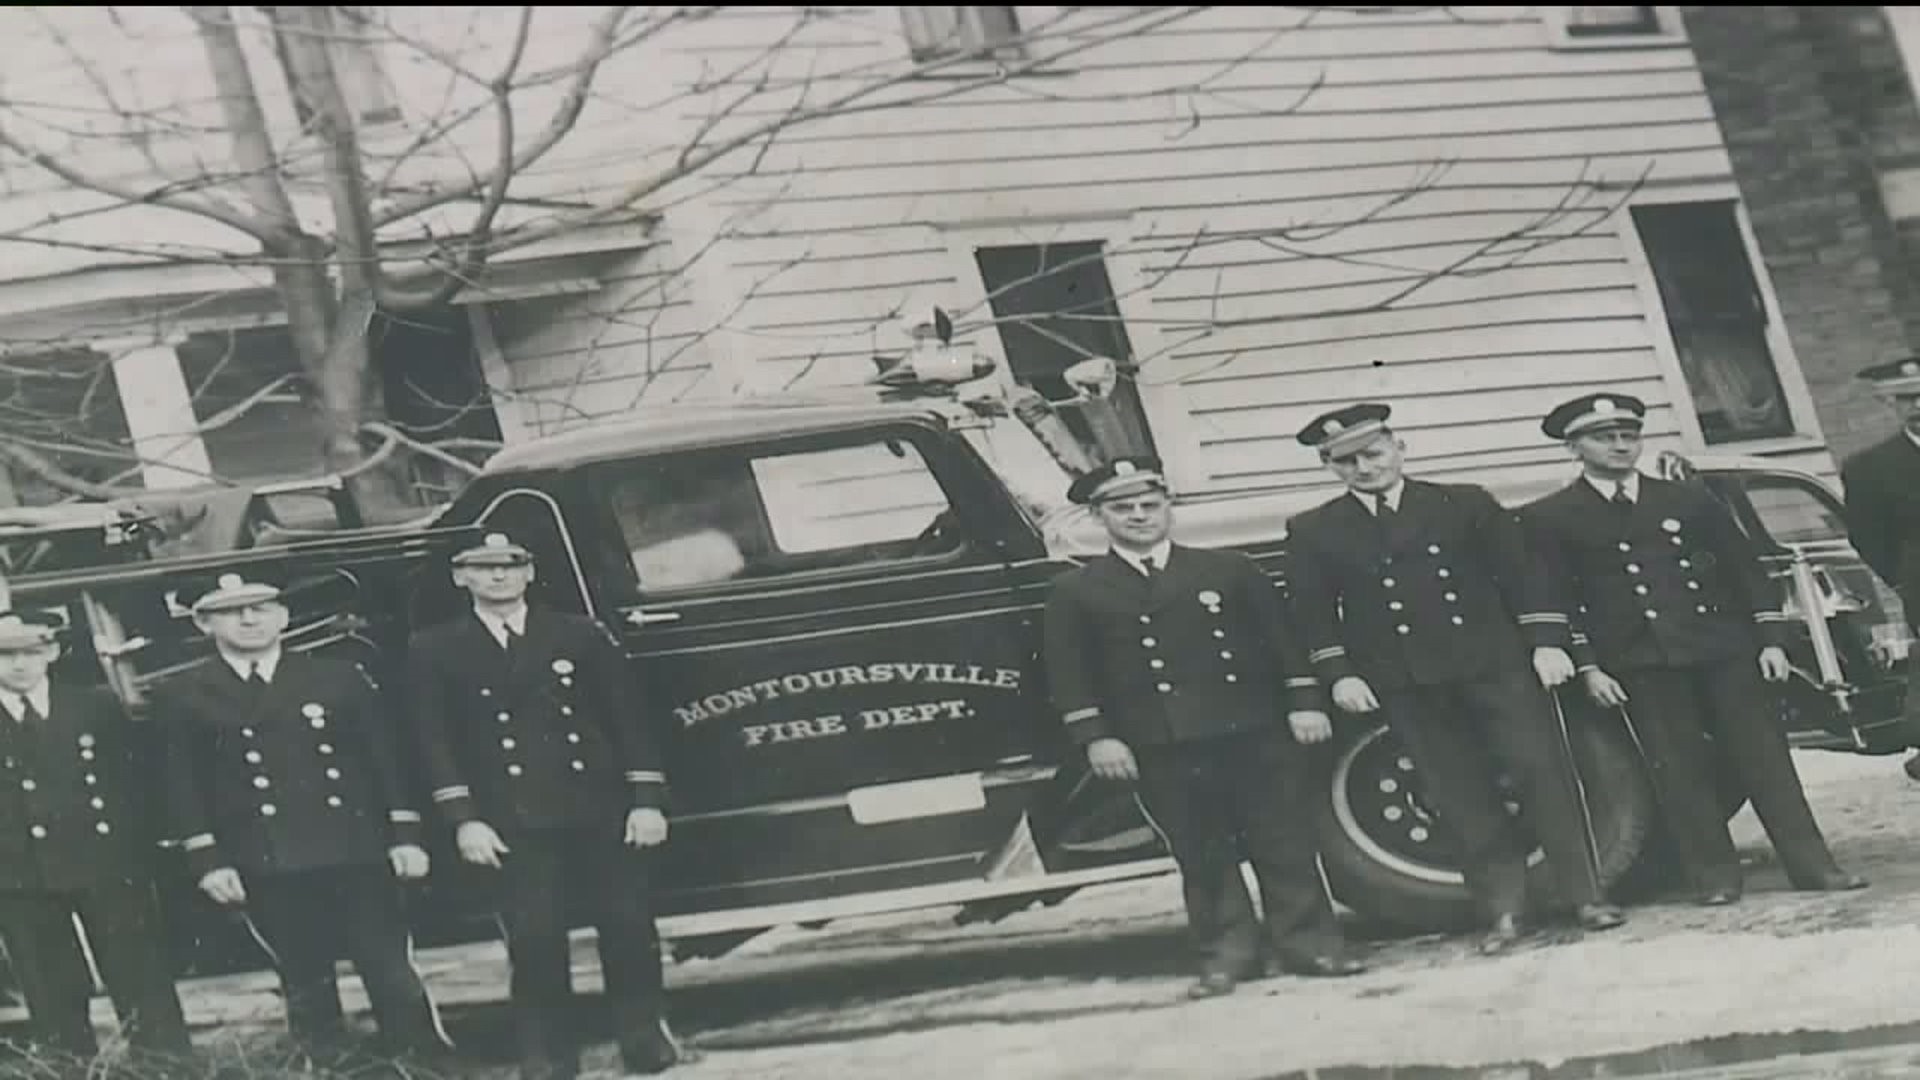 Hose Company in Montoursville Seeks Pictures from Past